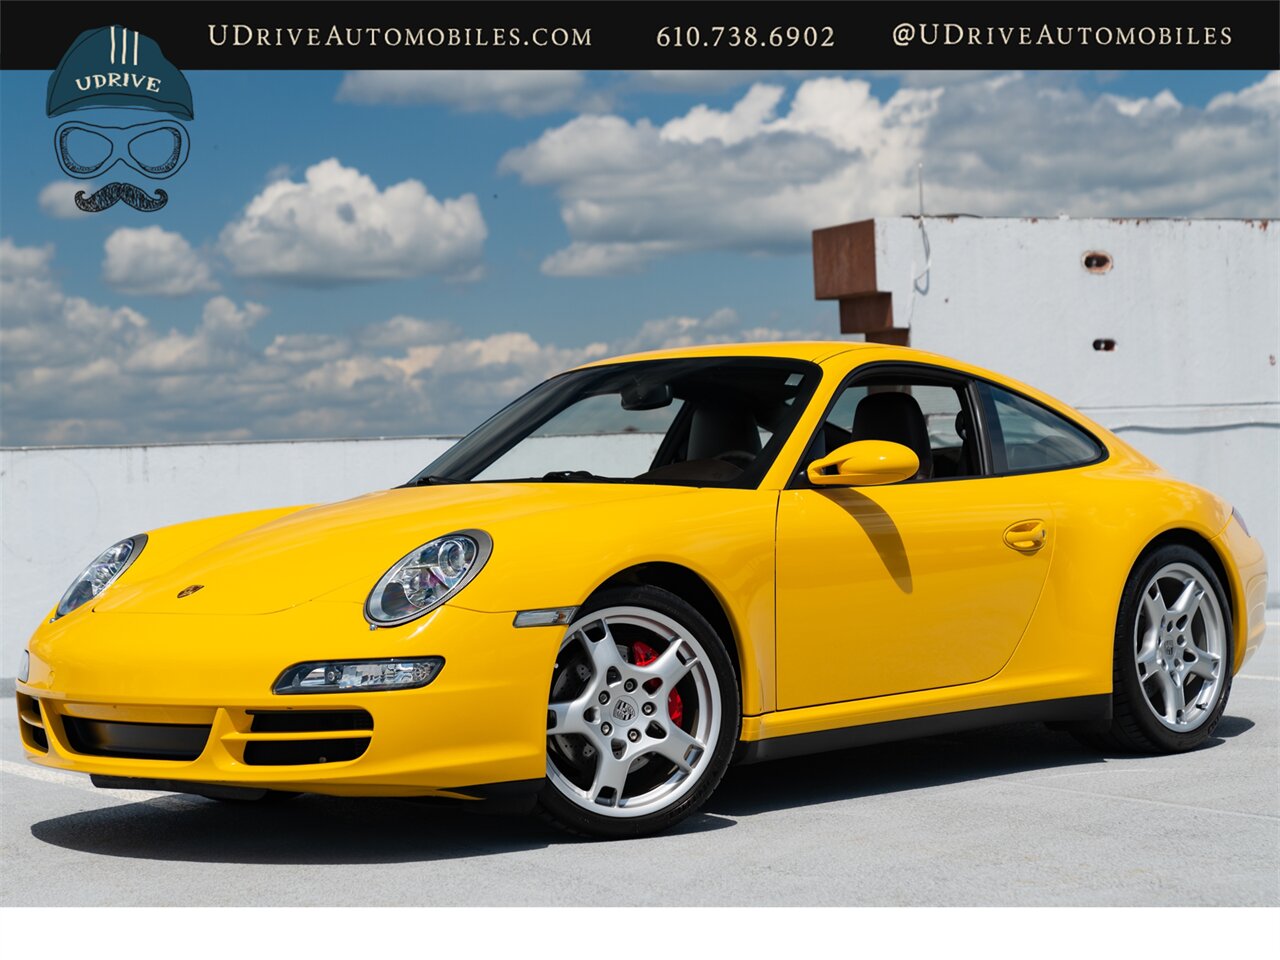 2006 Porsche 911 Carrera 4S  997 C4S 6 Speed Cocoa Full Lthr Chrono Sport Exhaust Special Color Combo - Photo 1 - West Chester, PA 19382